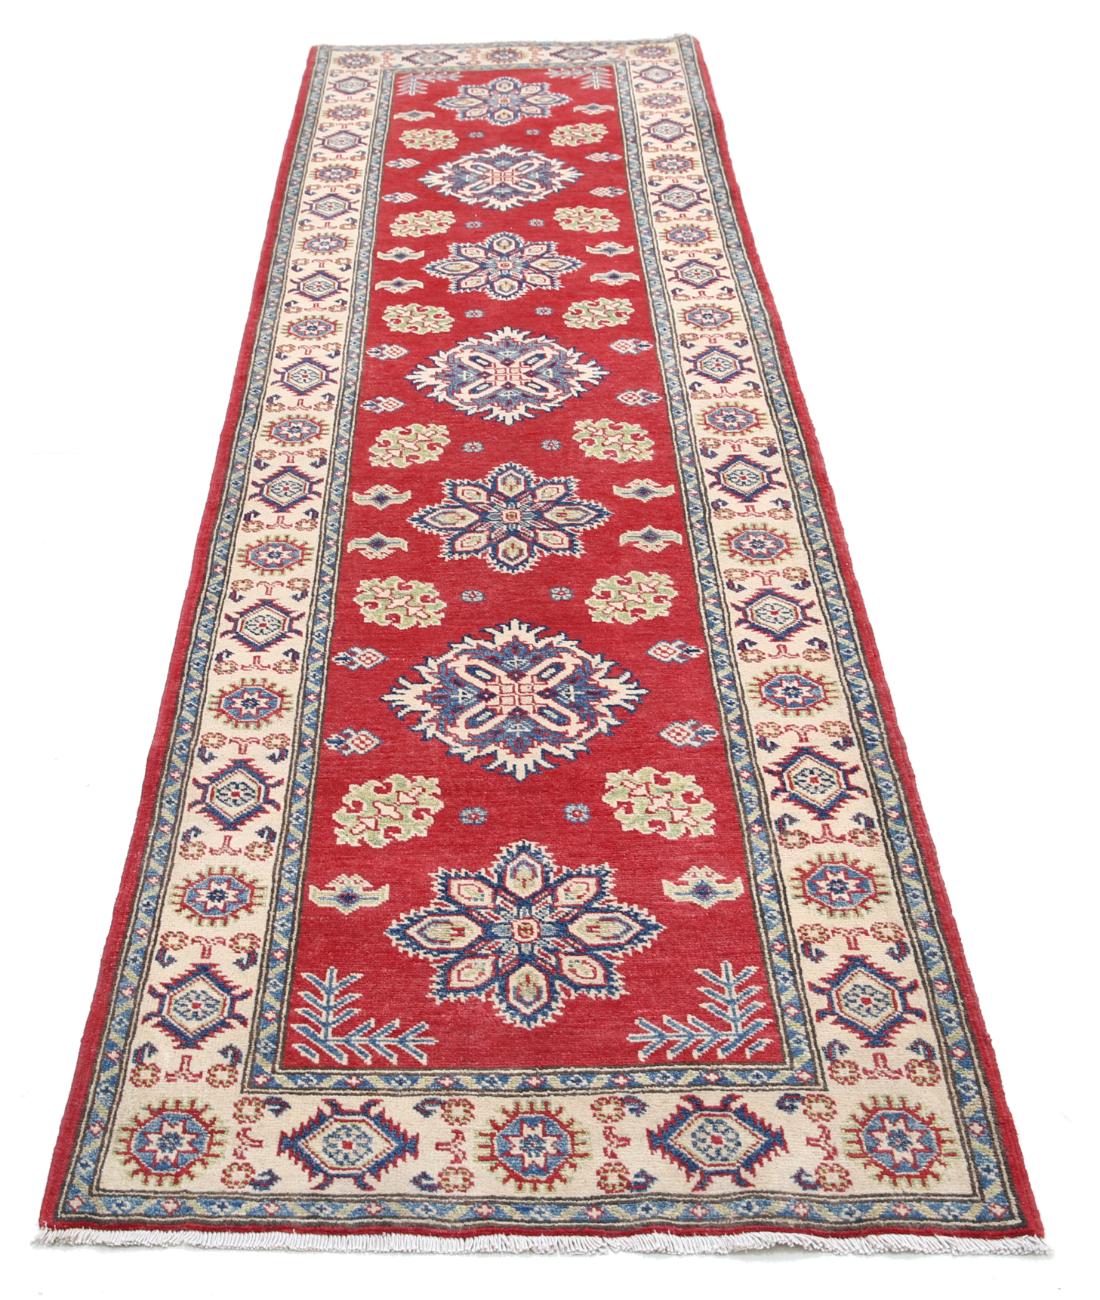 Hand Knotted Tribal Kazak Wool Rug - 2'10'' x 9'10'' 2' 10" X 9' 10" (86 X 300) / Red / Ivory